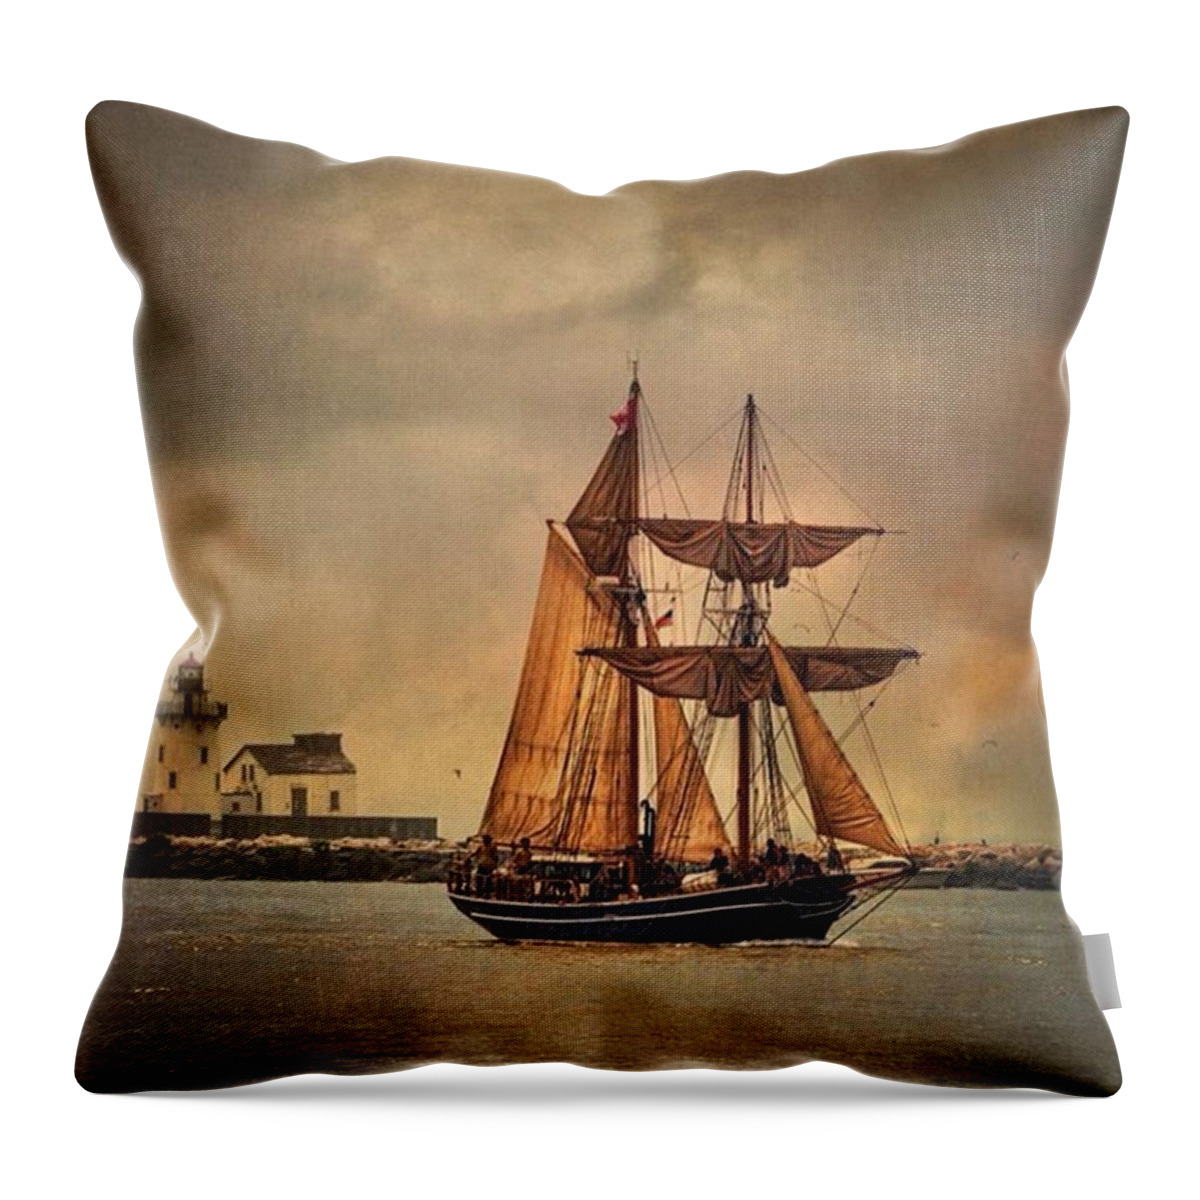 Fineart Throw Pillow featuring the photograph Tall Ships In Cleveland. #cle #fineart by Dale Kincaid